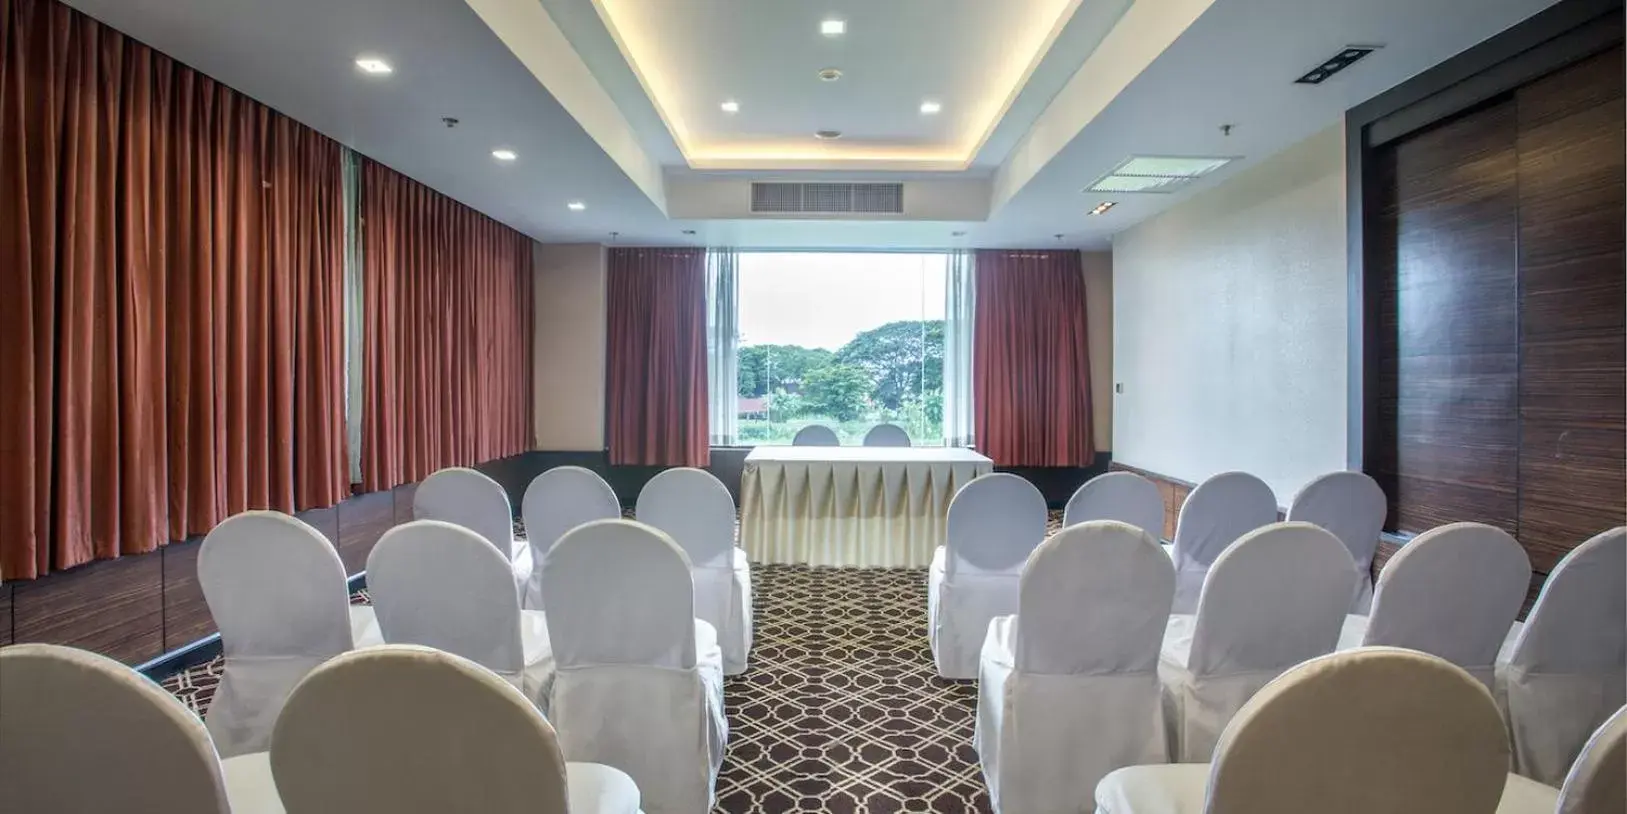 Meeting/conference room in Centara Riverside Hotel Chiang Mai